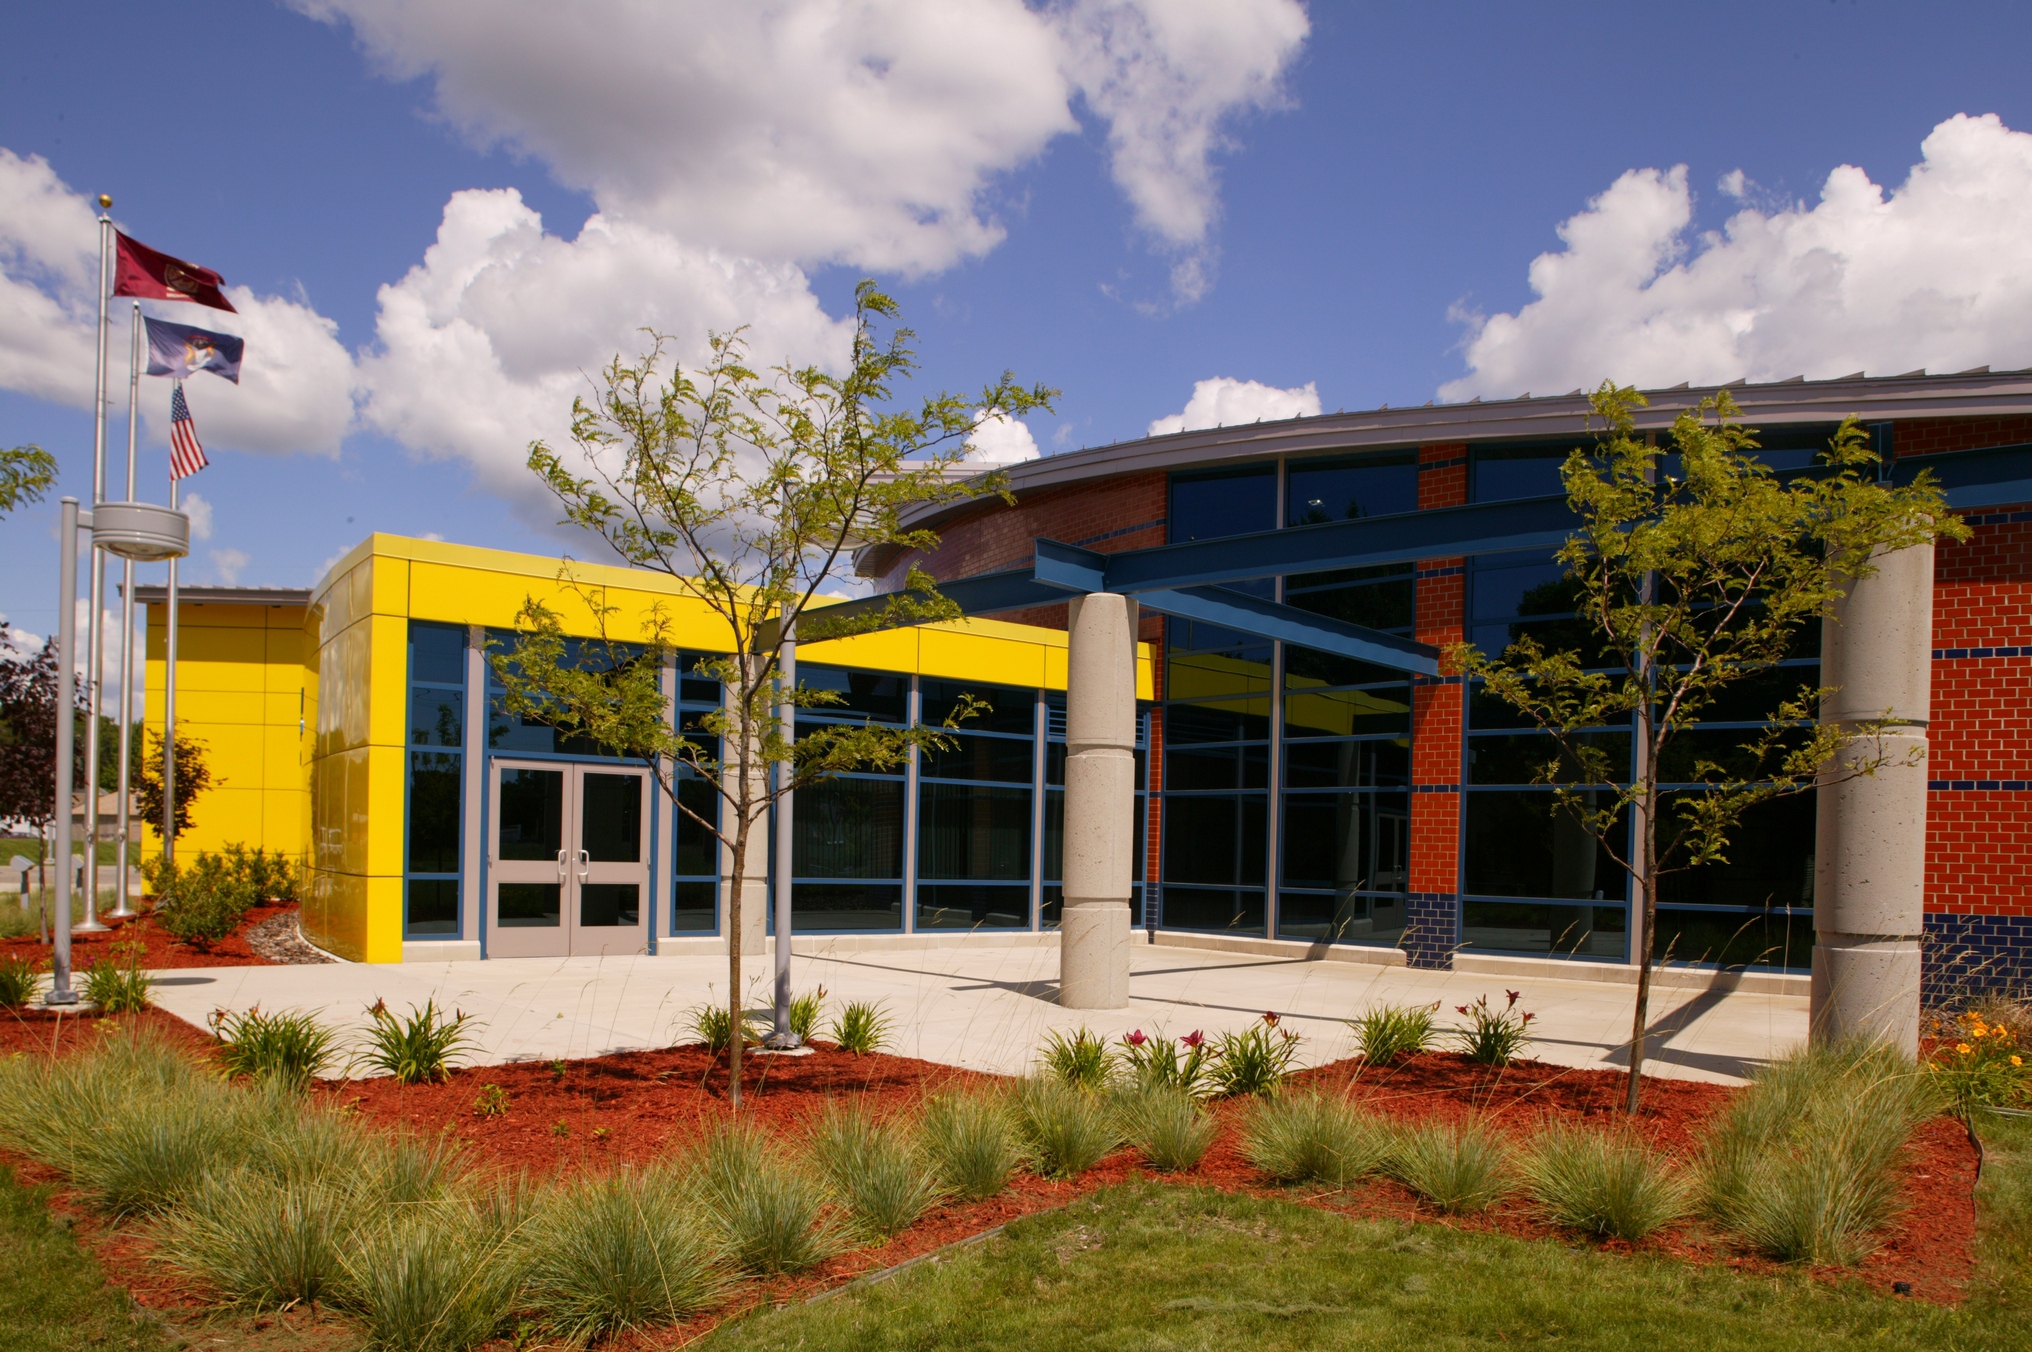 Building entrance with colorful yellow and blue structural design